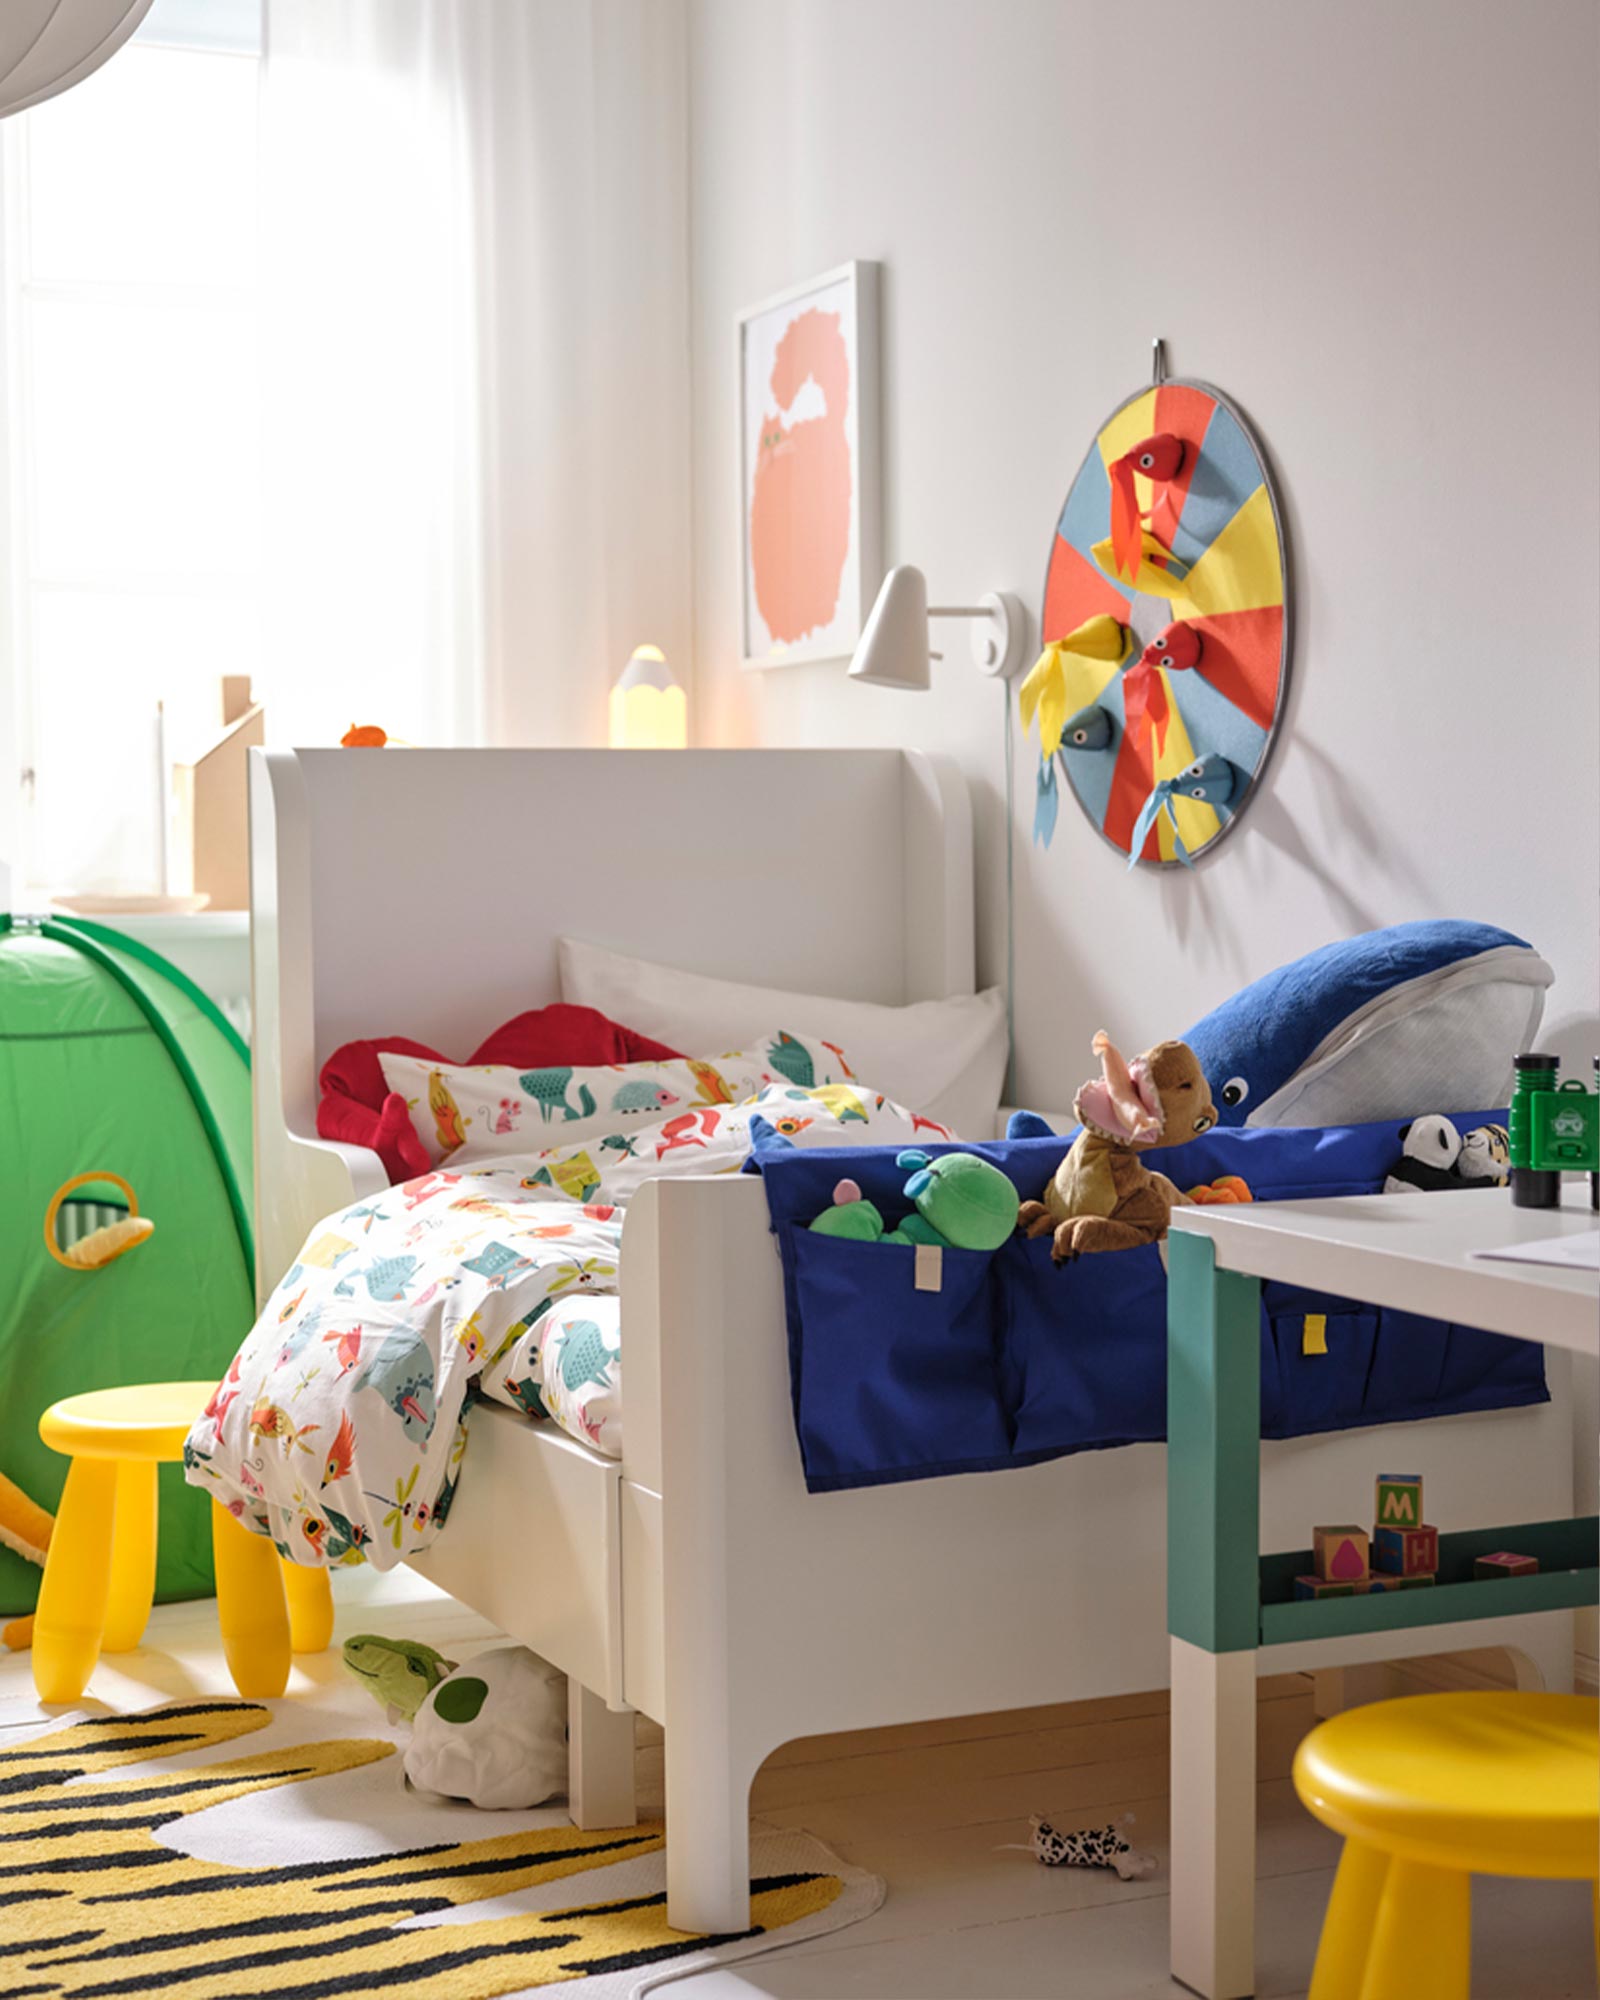 IKEA-a small childrens room 04